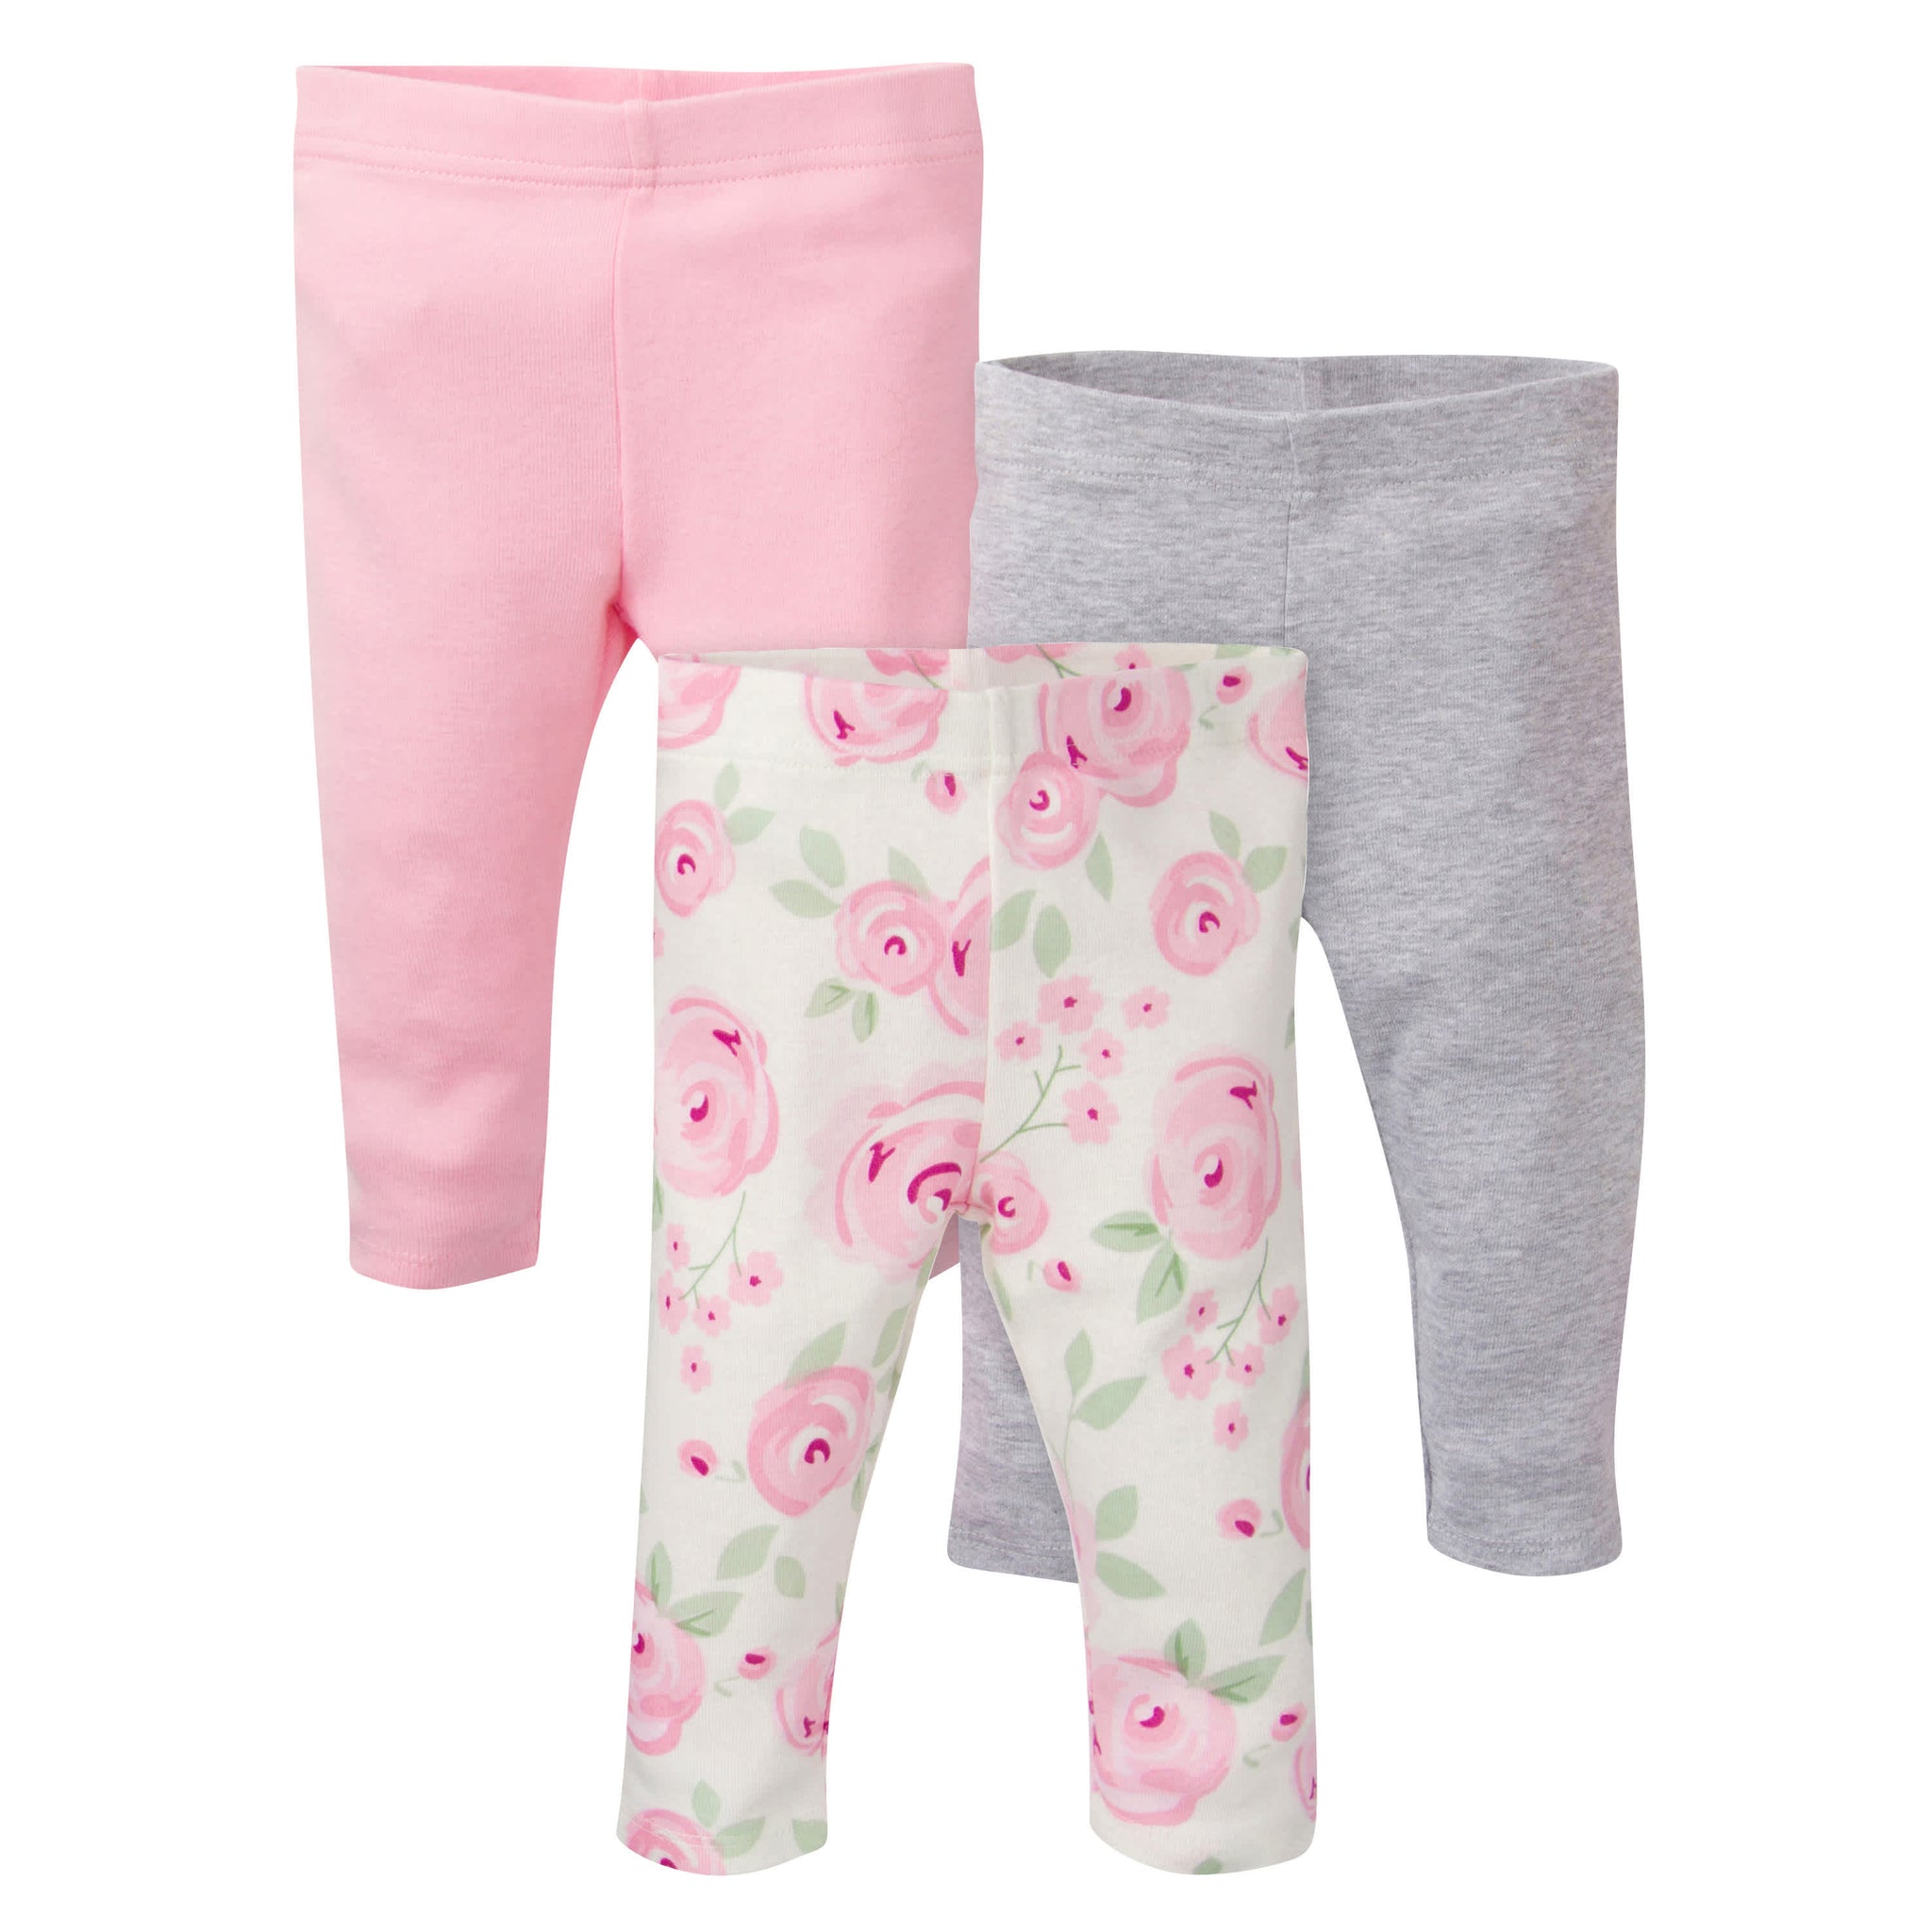 3-Pack Baby Girls Pink, Gray, & Floral Pants-Gerber Childrenswear Wholesale